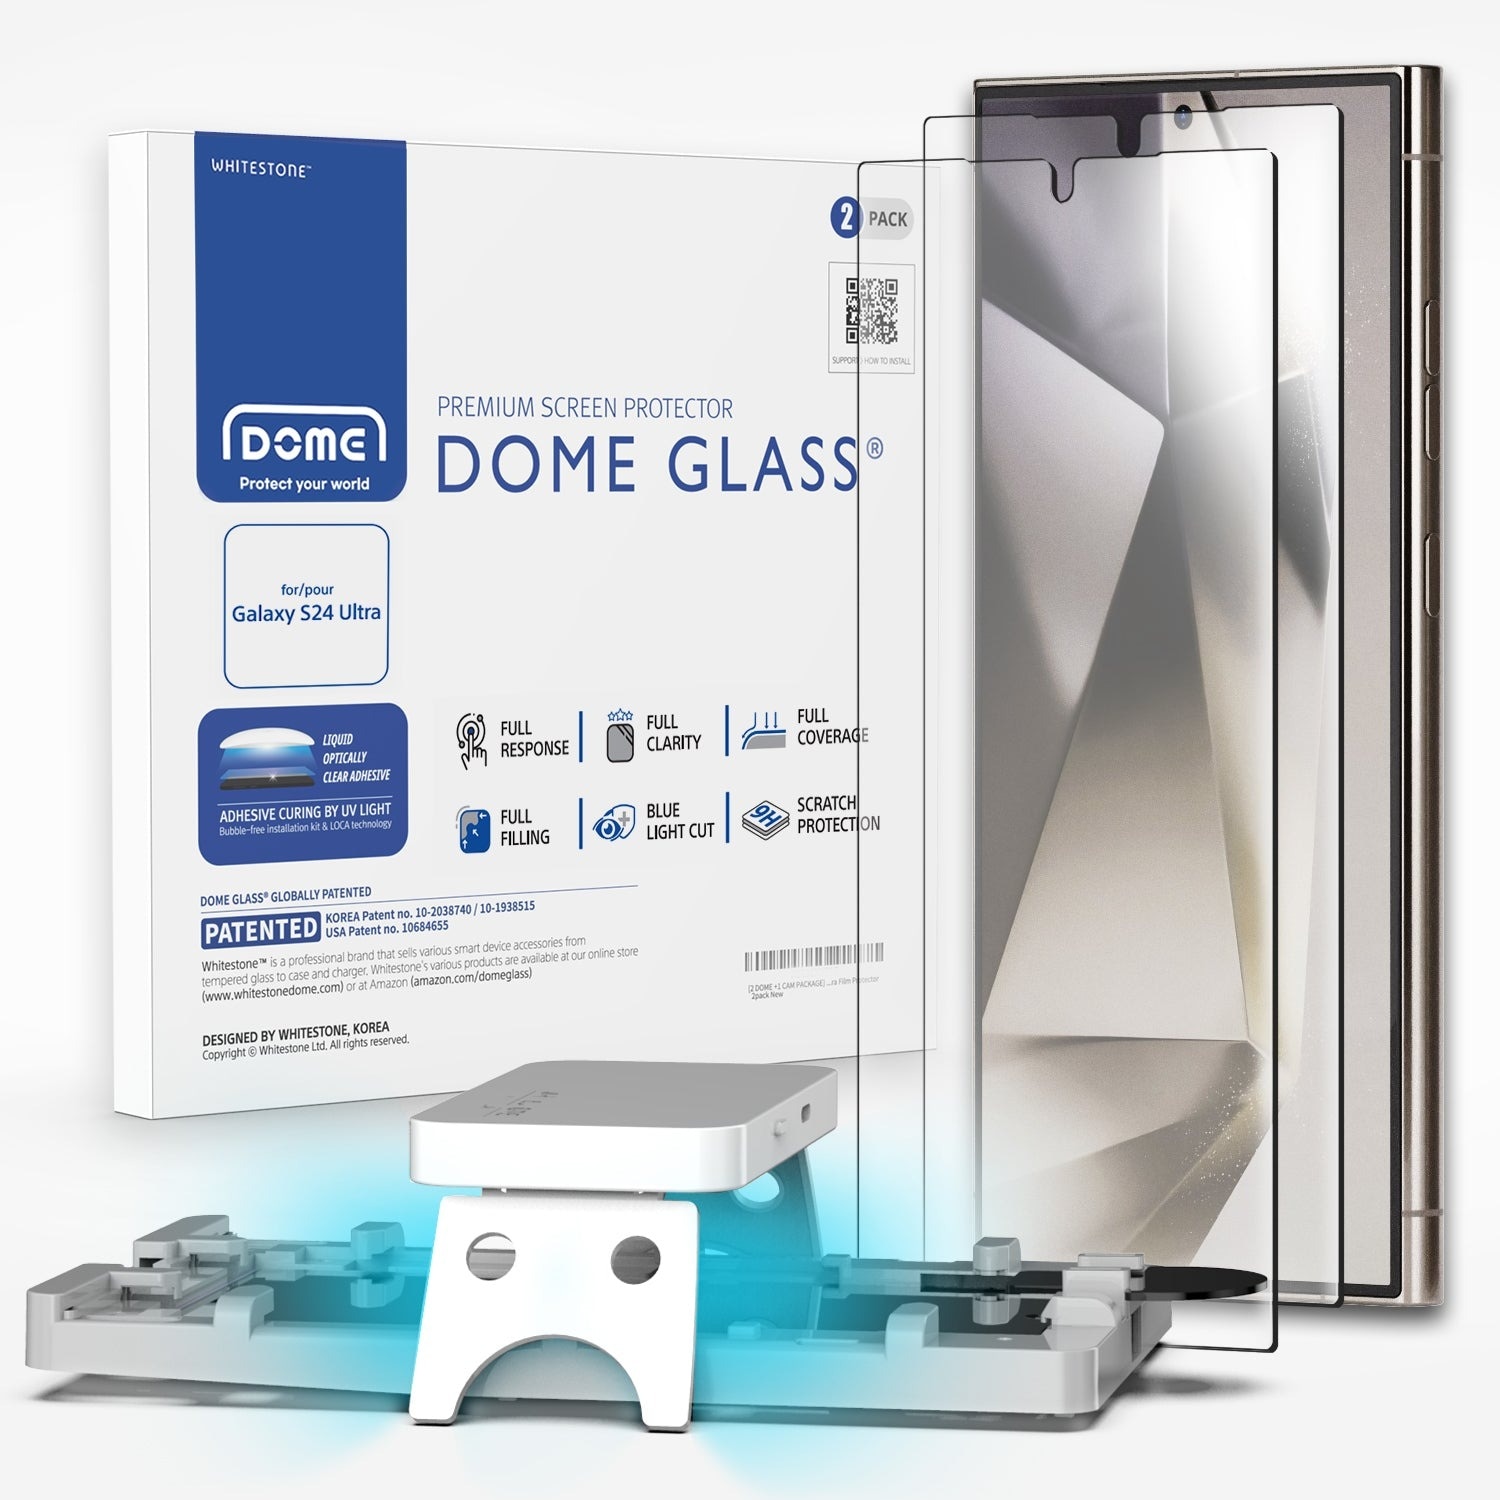 Dome Glass Screen Protector Samsung Galaxy S24 Ultra (2-pack)